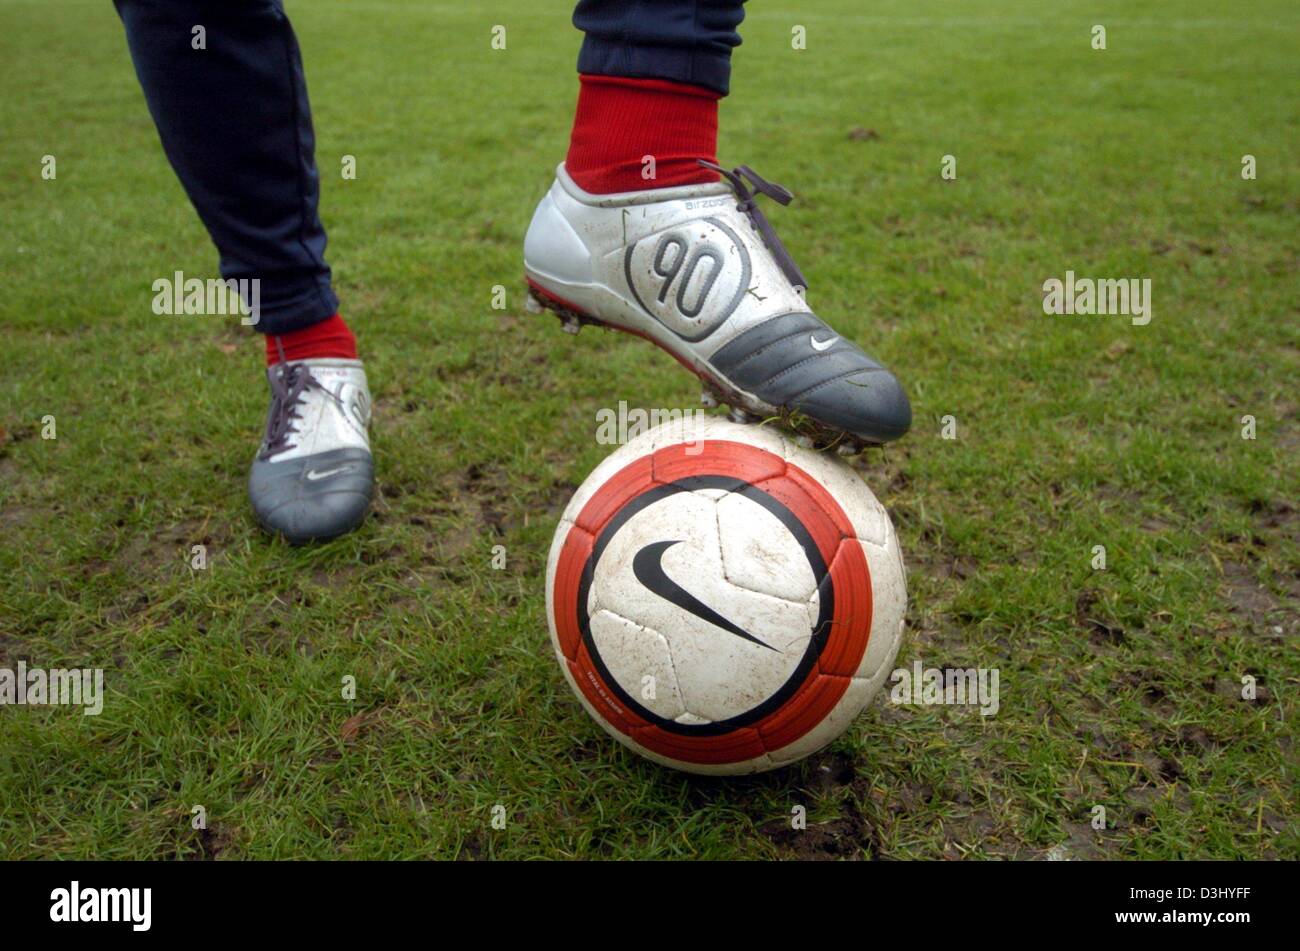 (dpa) A Hamburg soccer player poses with the new 'Nike' shoe model 'Air Zoom Total 90 III' on the HSV Hamburg training grounds in Hamburg on Wednesday, 25 February, 2004. On 6 March 2004 some of the HSV players will use this new model. Stock Photo